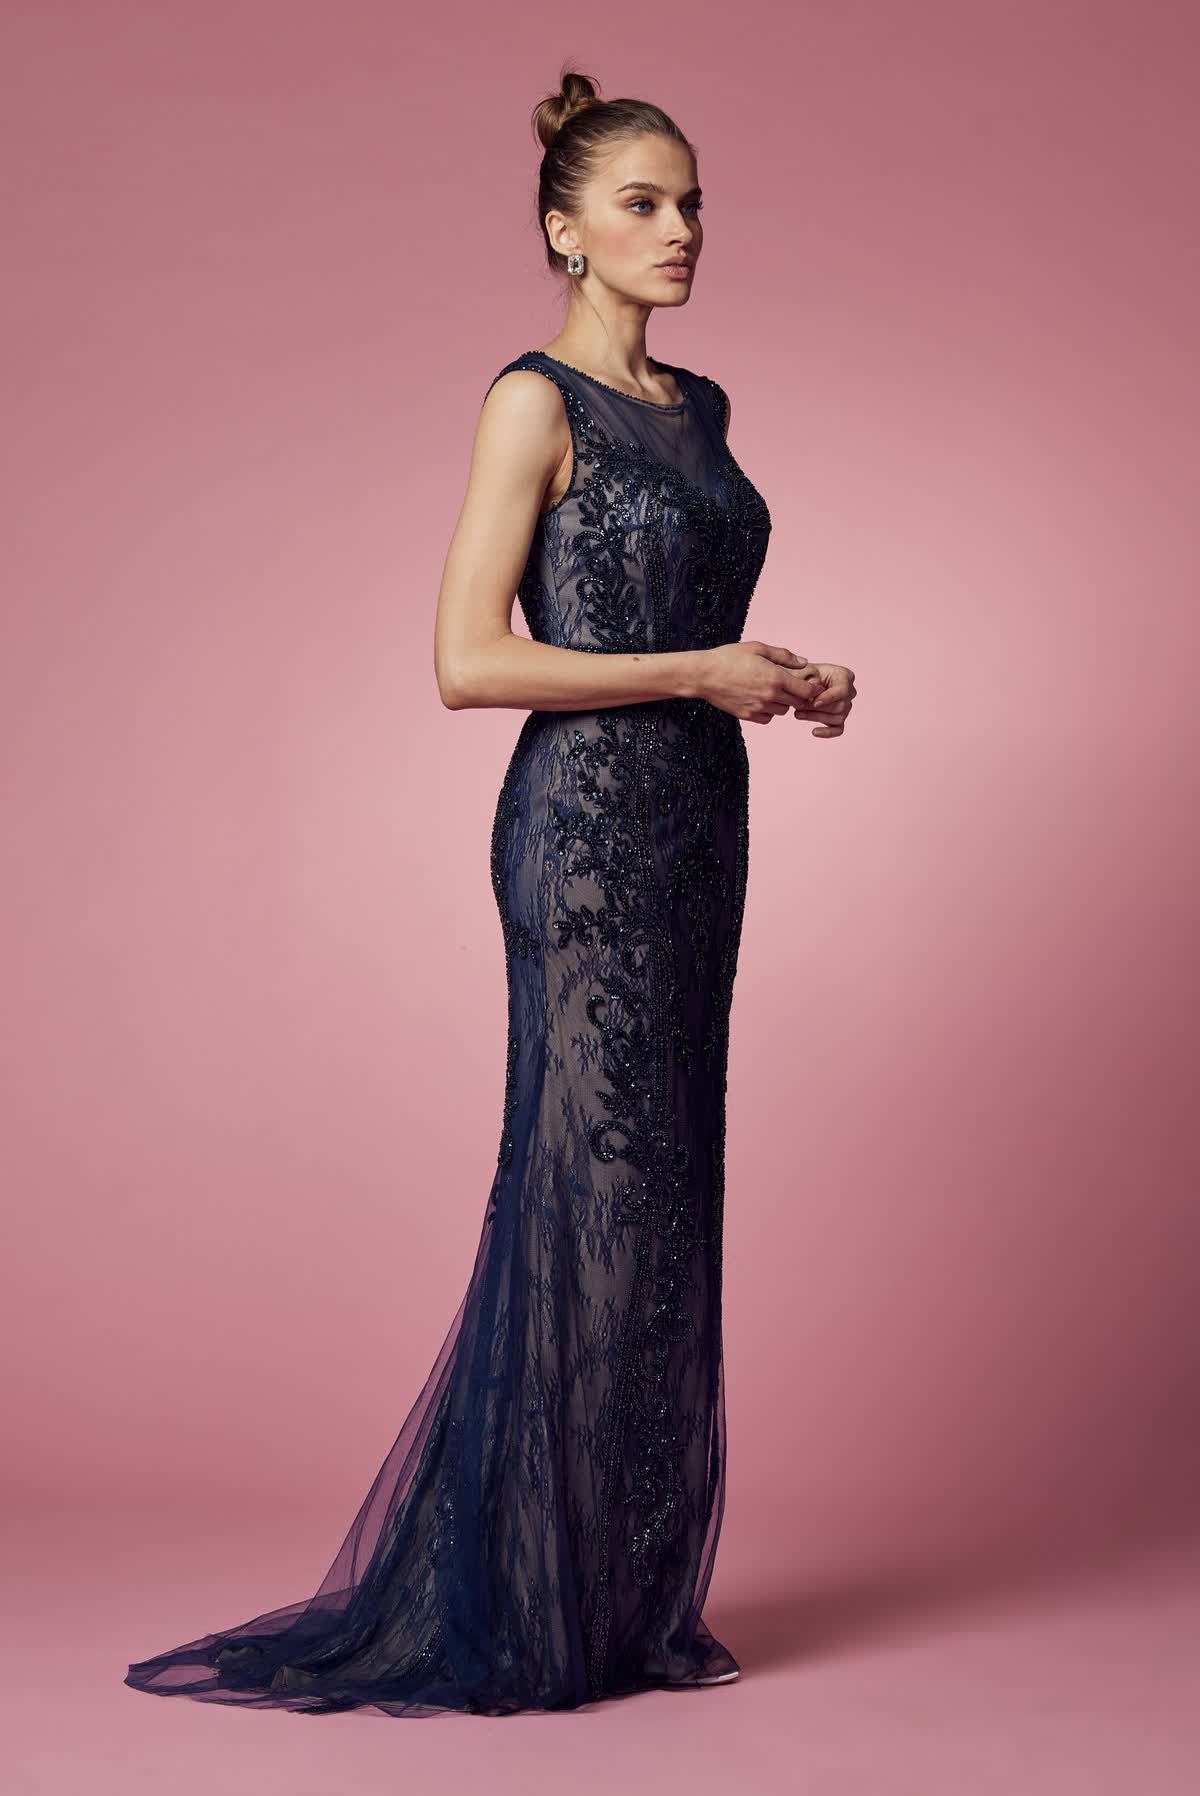 Embroidered Lace Illusion Sweetheart Long Prom & Mother Of The Bride Dress NXE1006-Mother of the Bride Dress-smcfashion.com